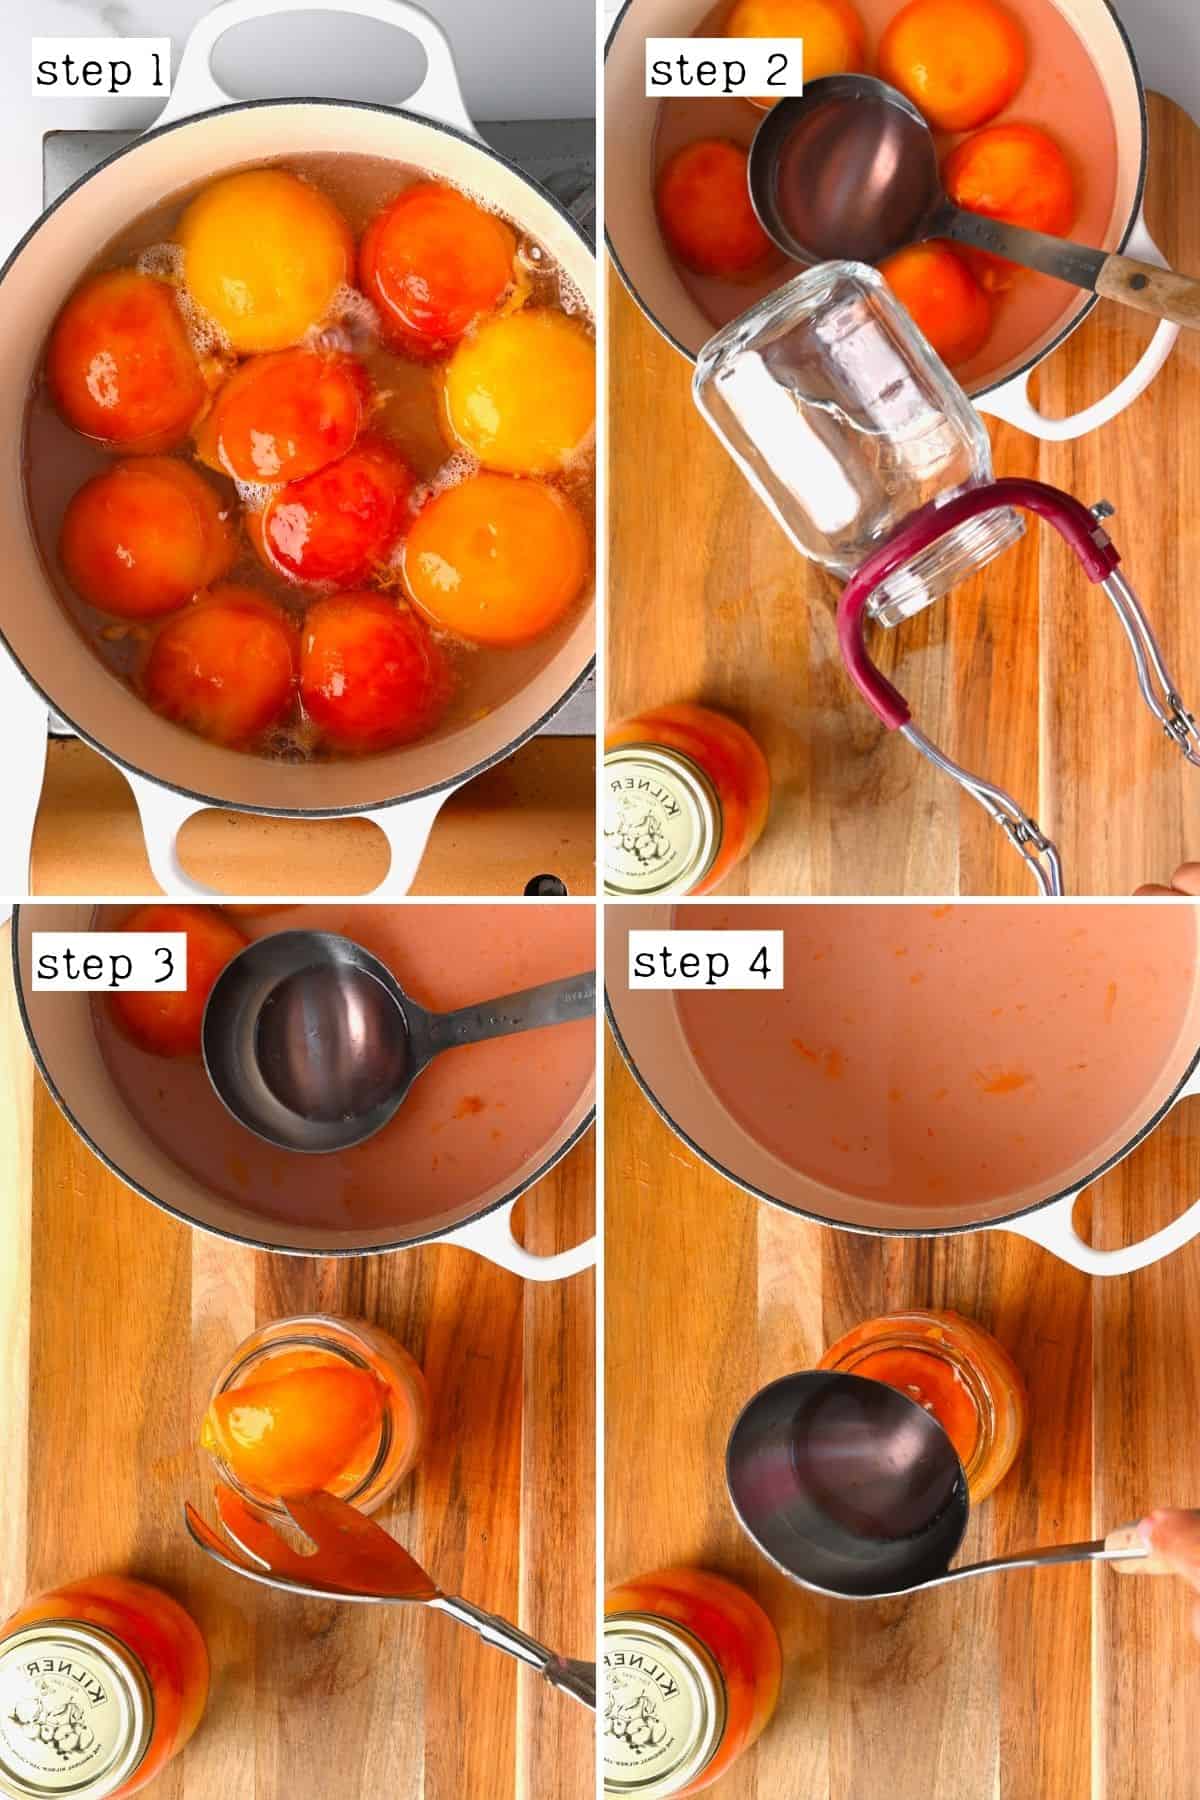 Steps for canning peaches